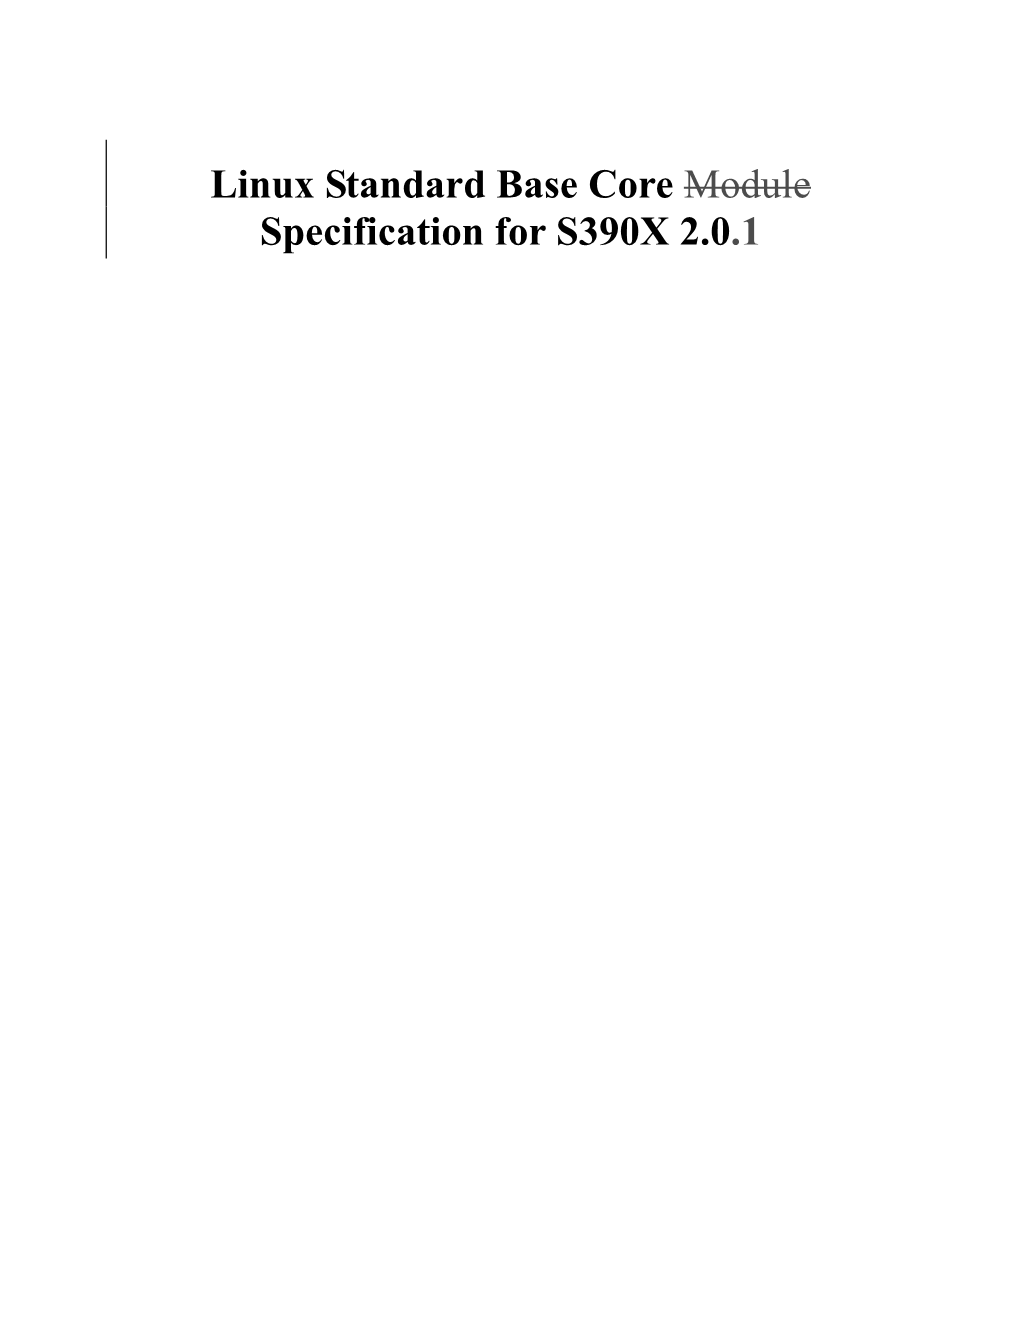 Linux Standard Base Core Module Specification for S390X 2.0.1